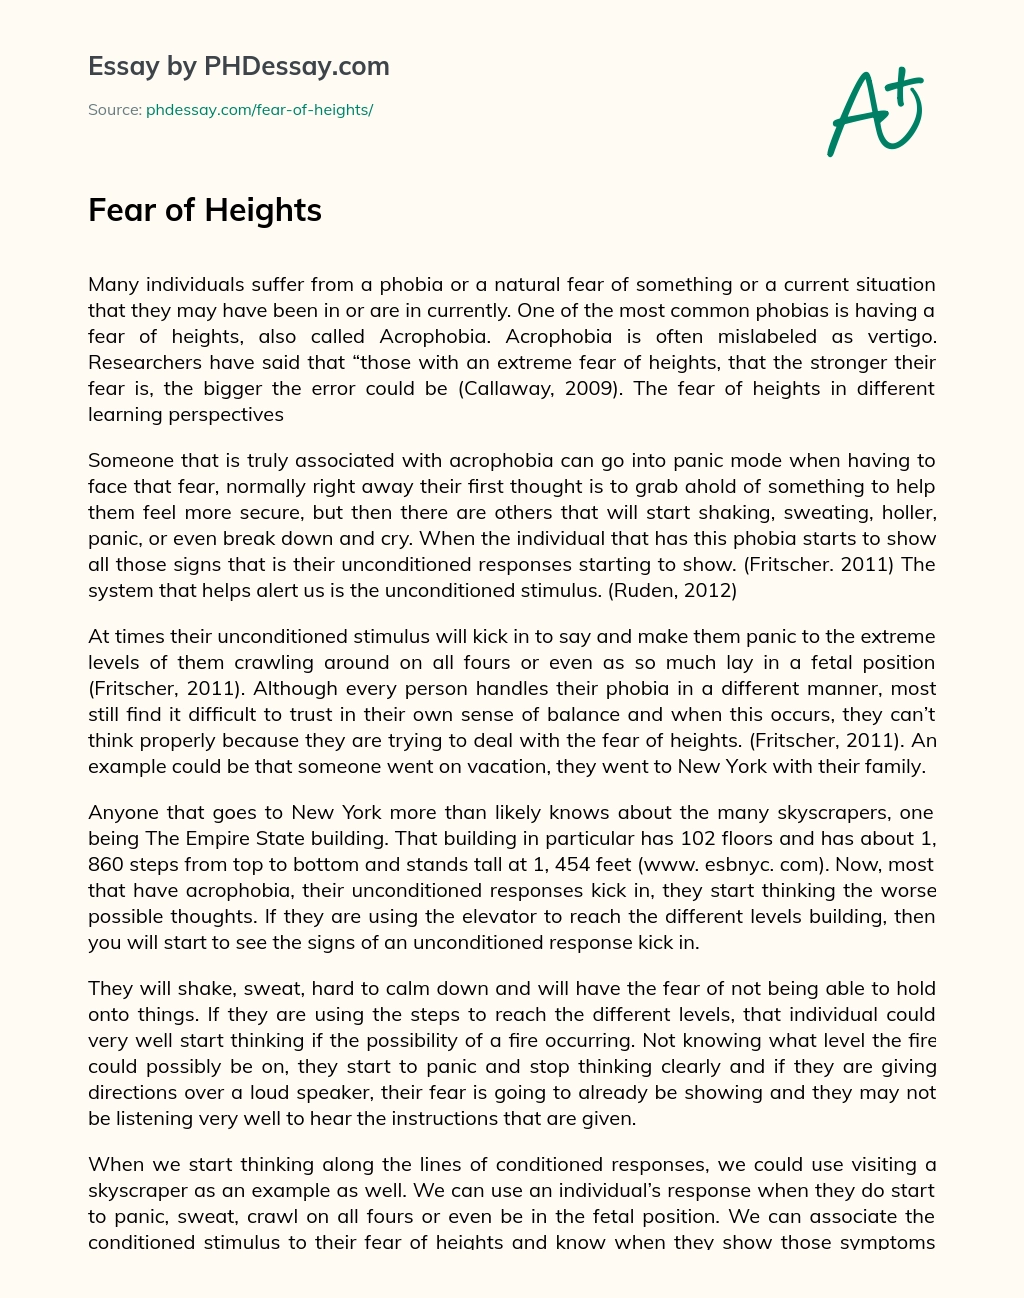 Fear of Heights essay